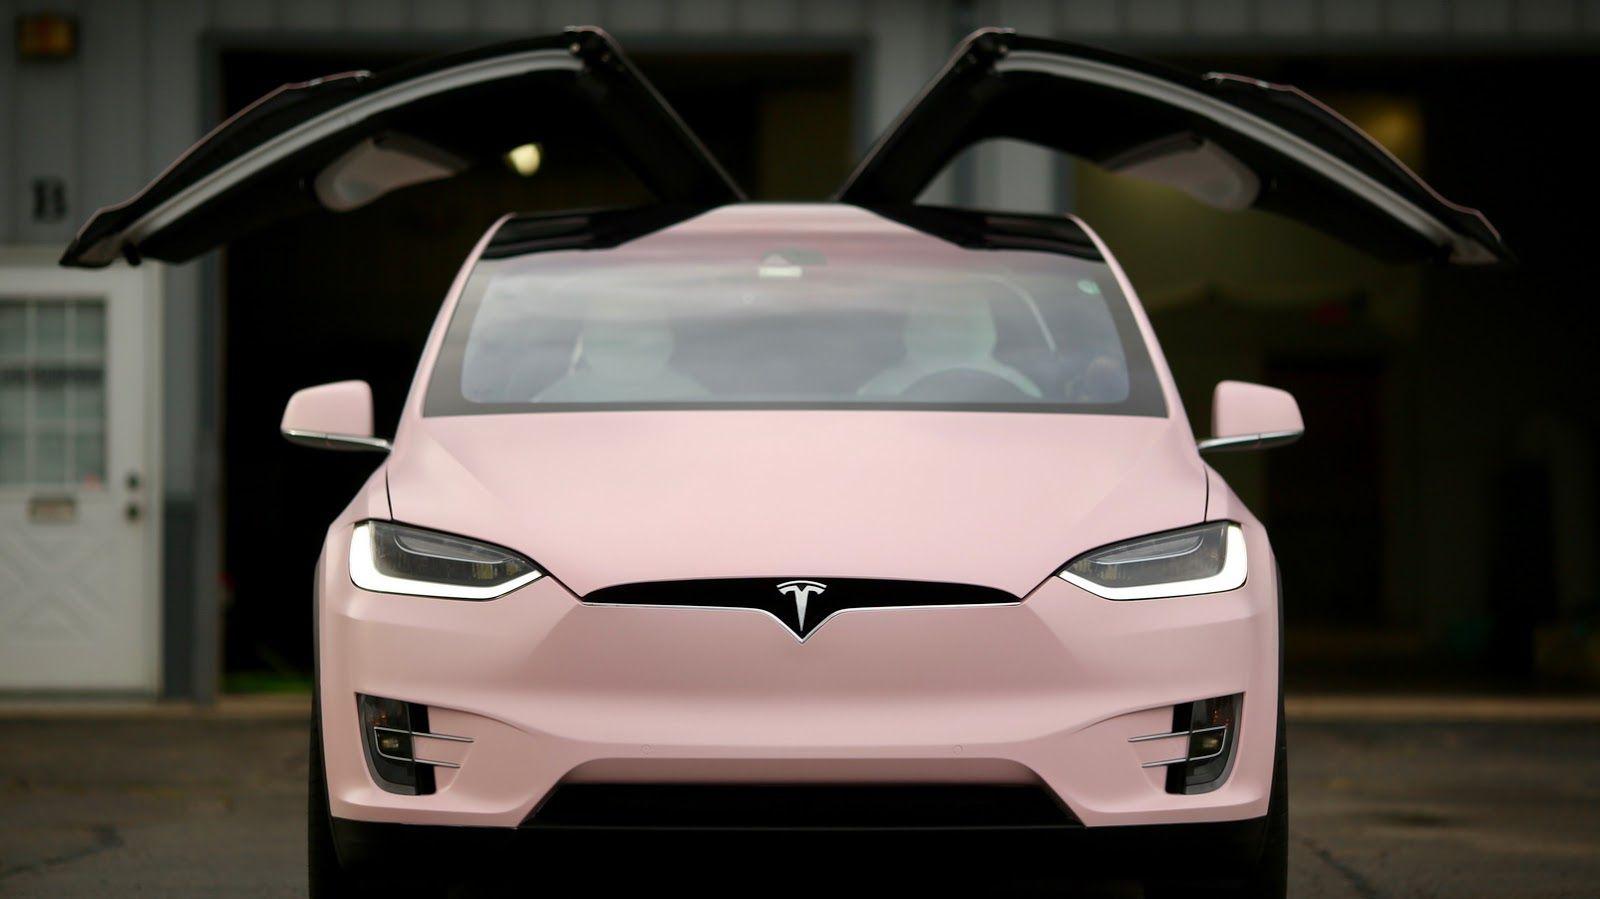 This Tesla Model X Owner Really Loves The Color Pink Carscoops